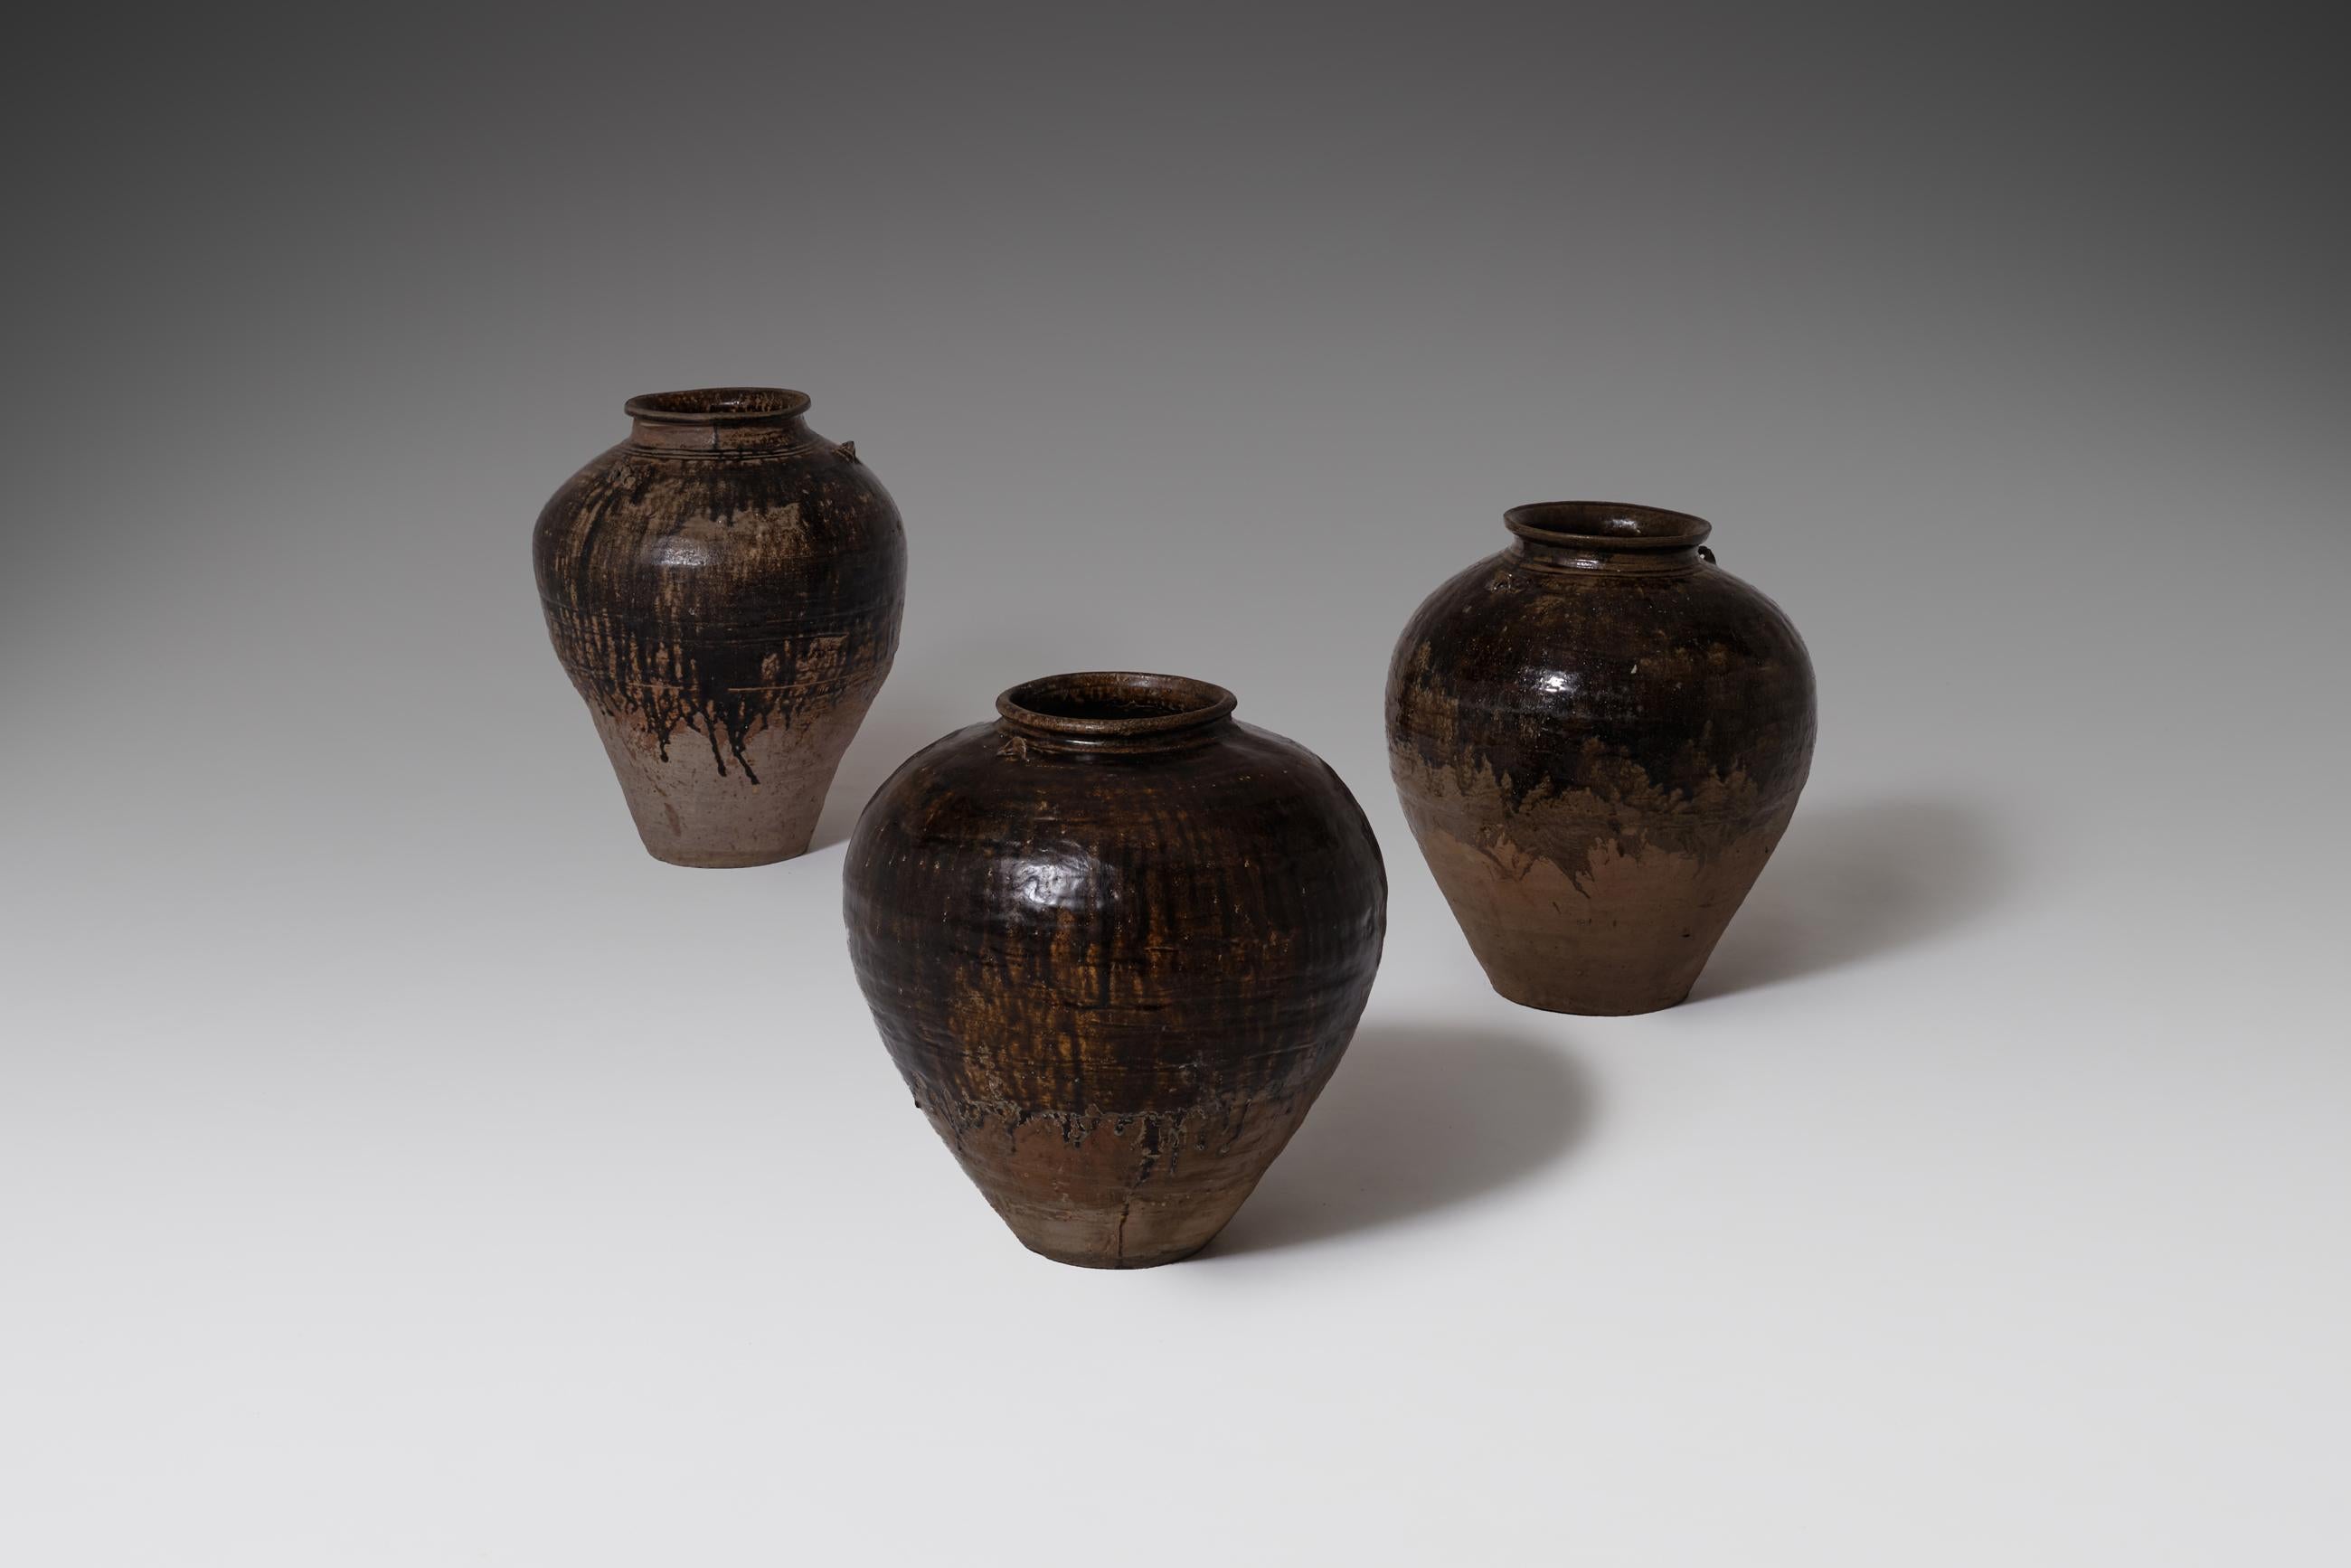 Set of three large ceramic pots from the Martaban area of Burma, 18th century. These large and heavy stoneware jars were used to store food, drinkwater etc; they were partly put in the ground with the unglazed surface, to keep the content of the